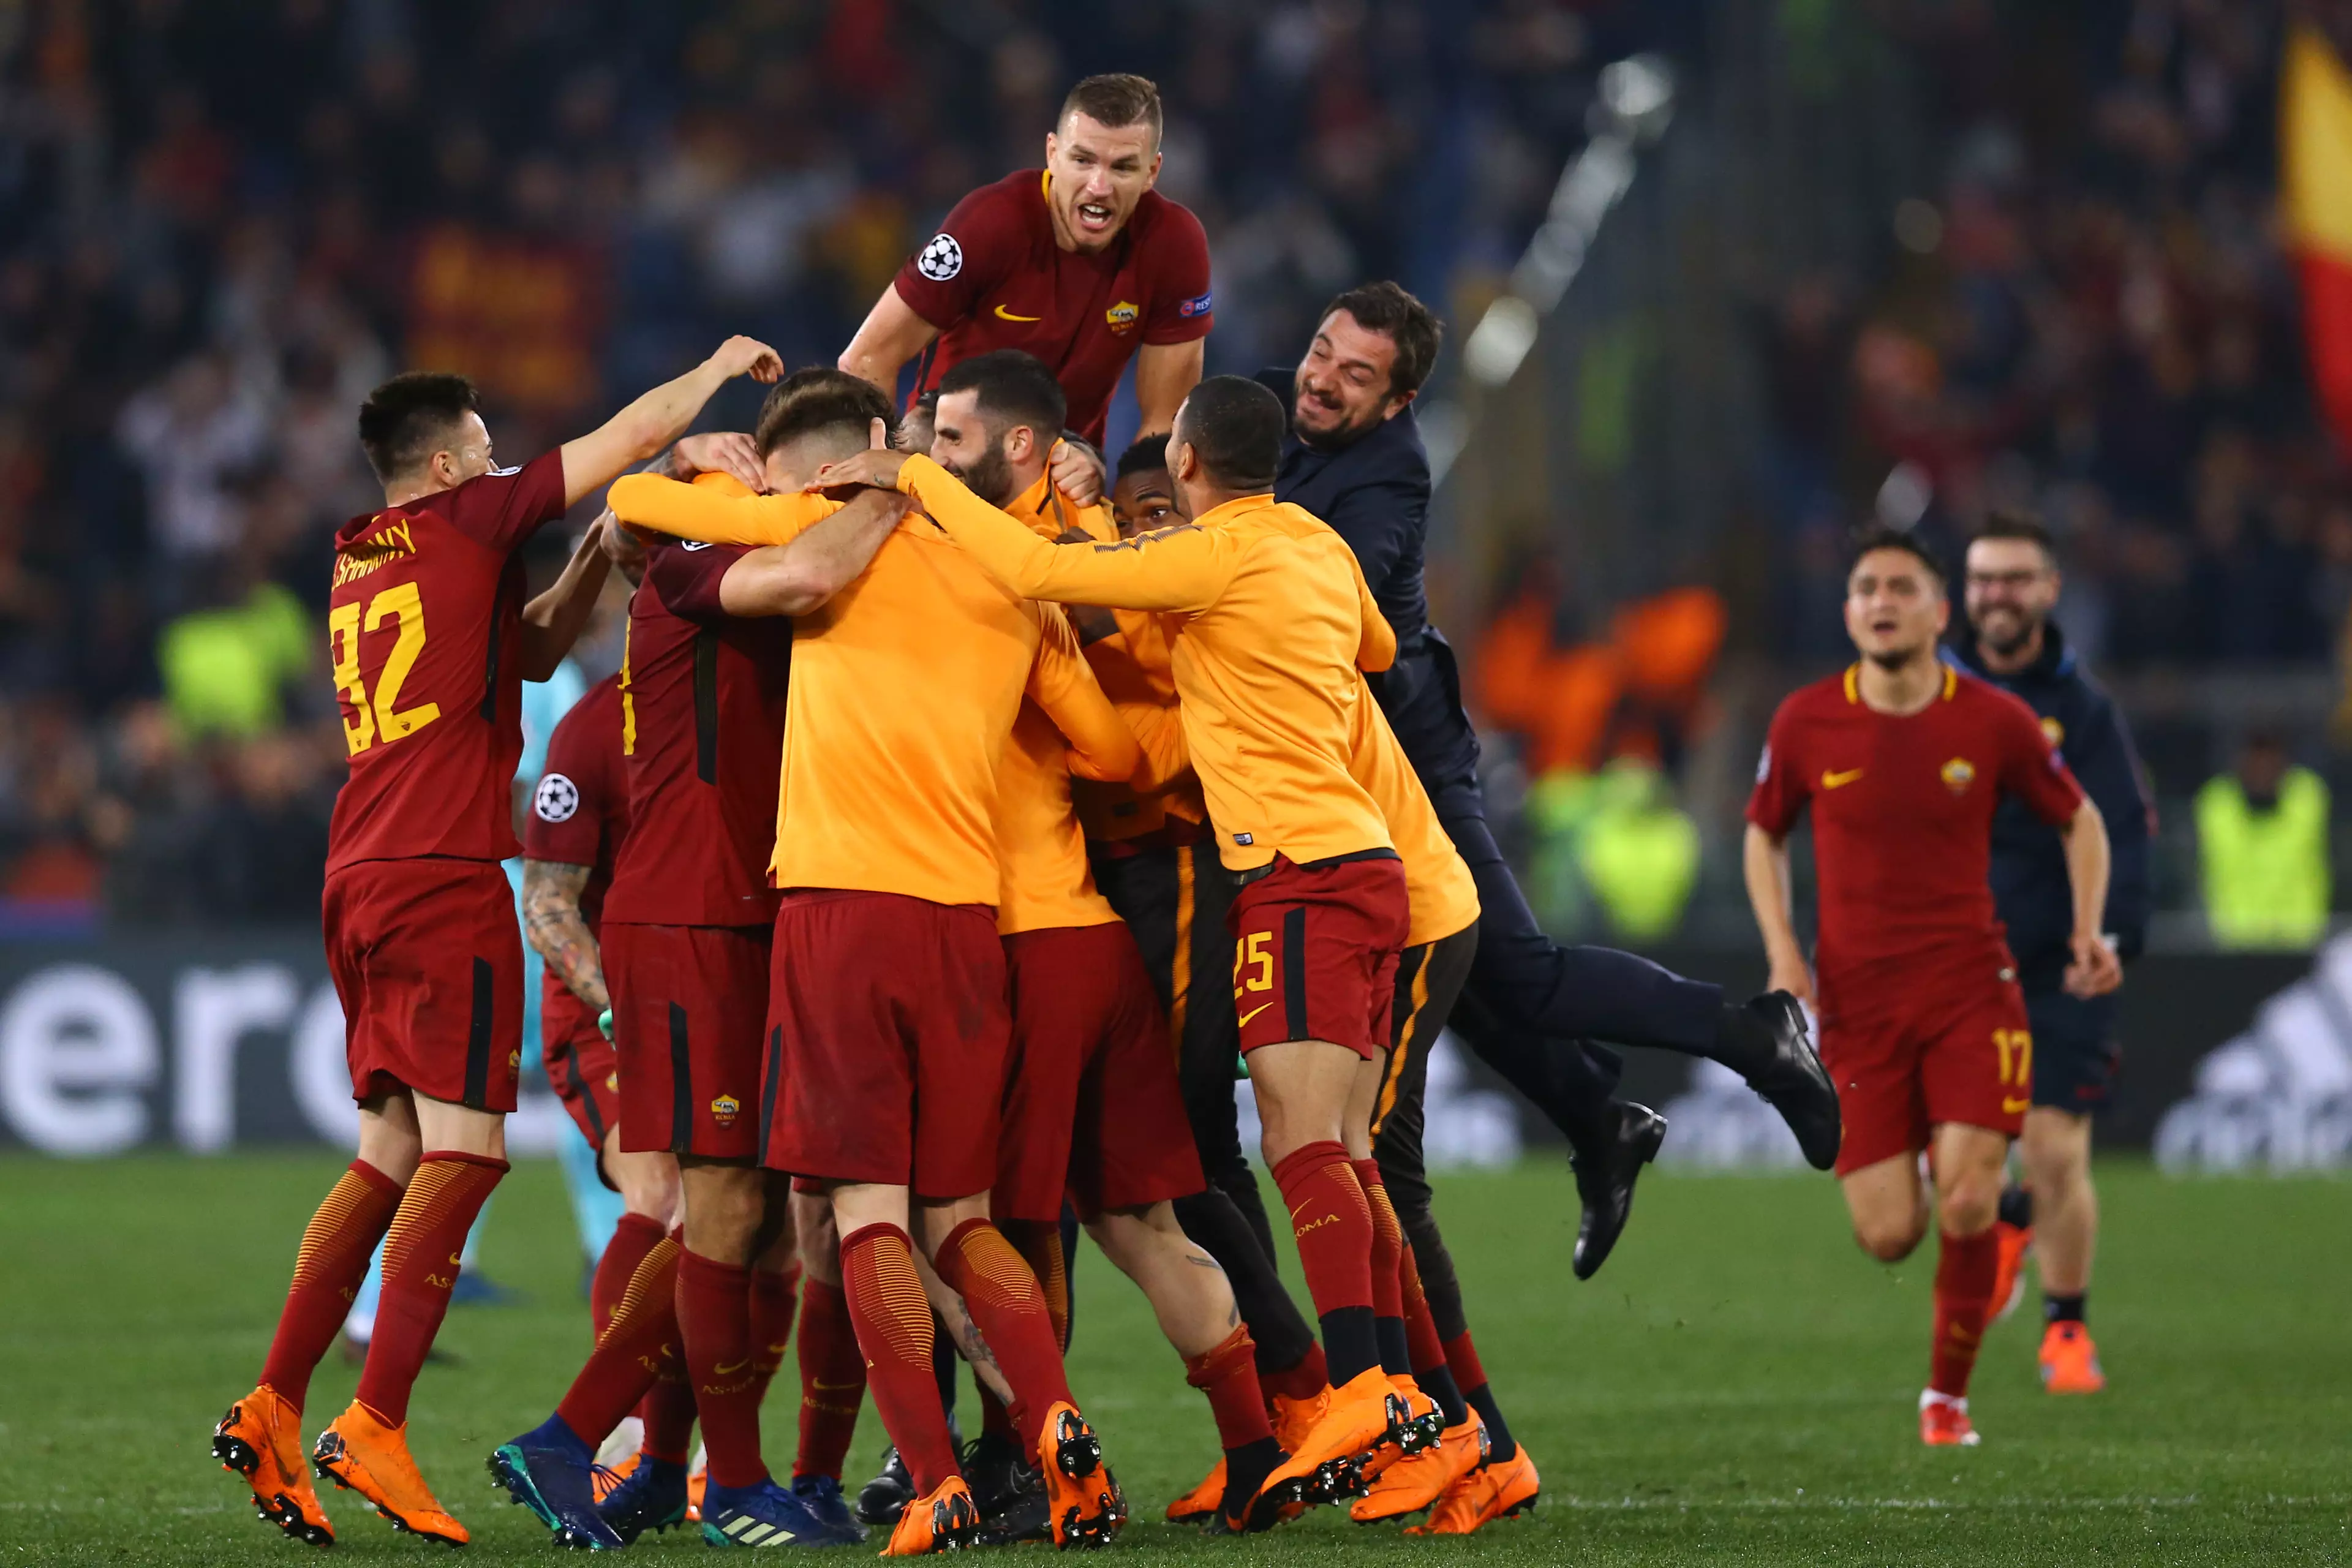 AS Roma players celebrate at the final whistle. Image: PA